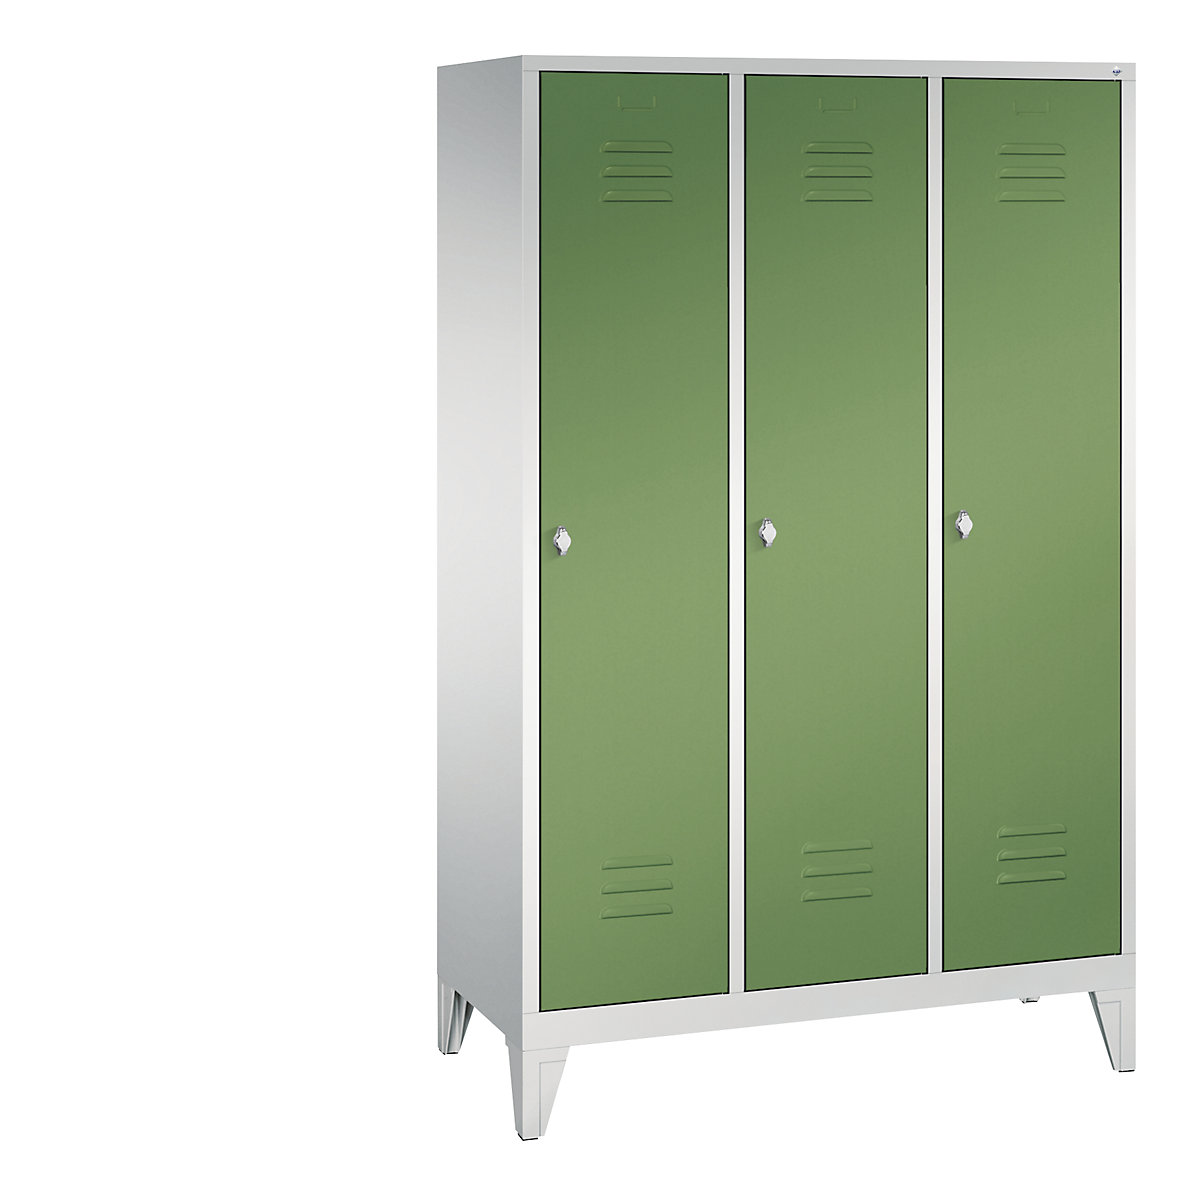 CLASSIC cloakroom locker with feet – C+P, 3 compartments, compartment width 400 mm, light grey / reseda green-4